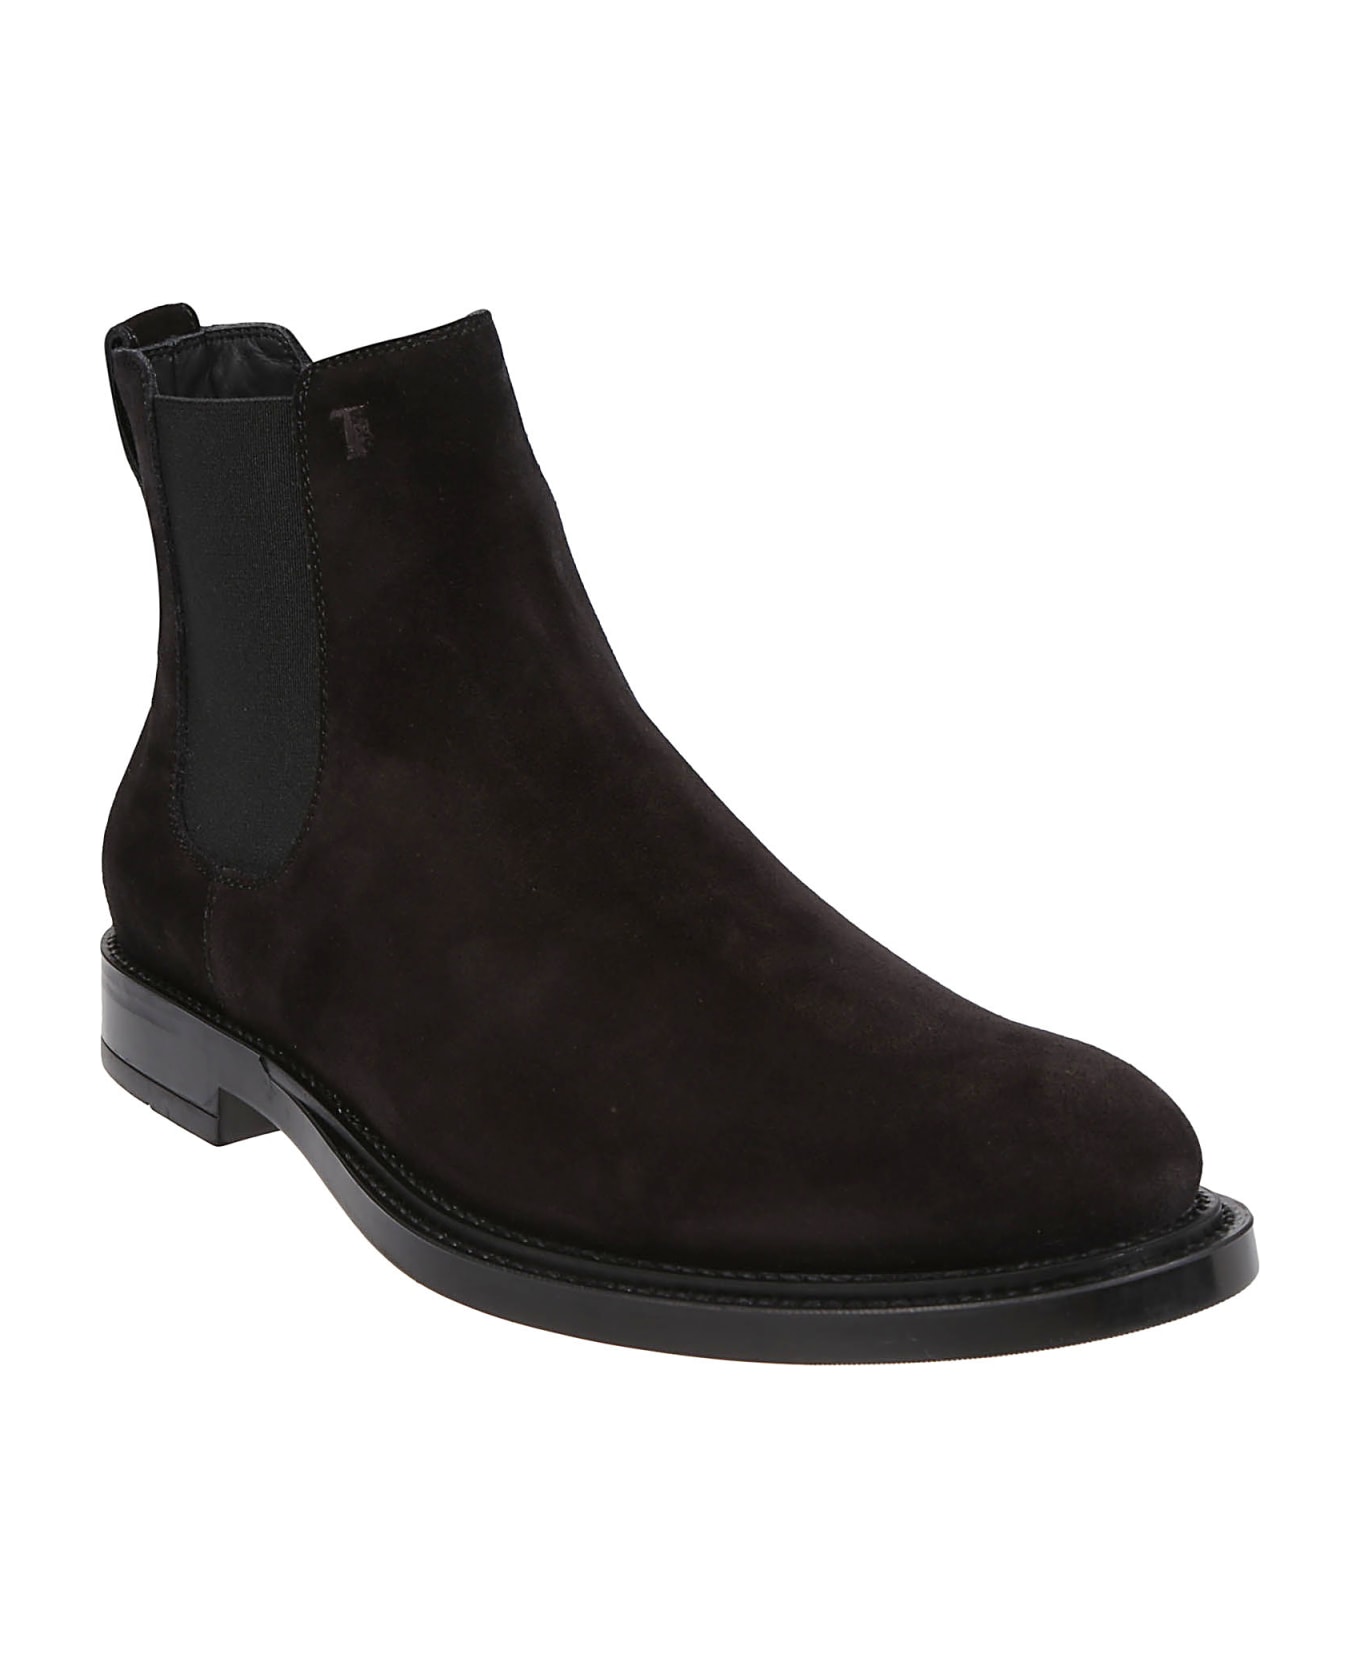 Tod's 62c Formal Ankle Boots - Nero ブーツ